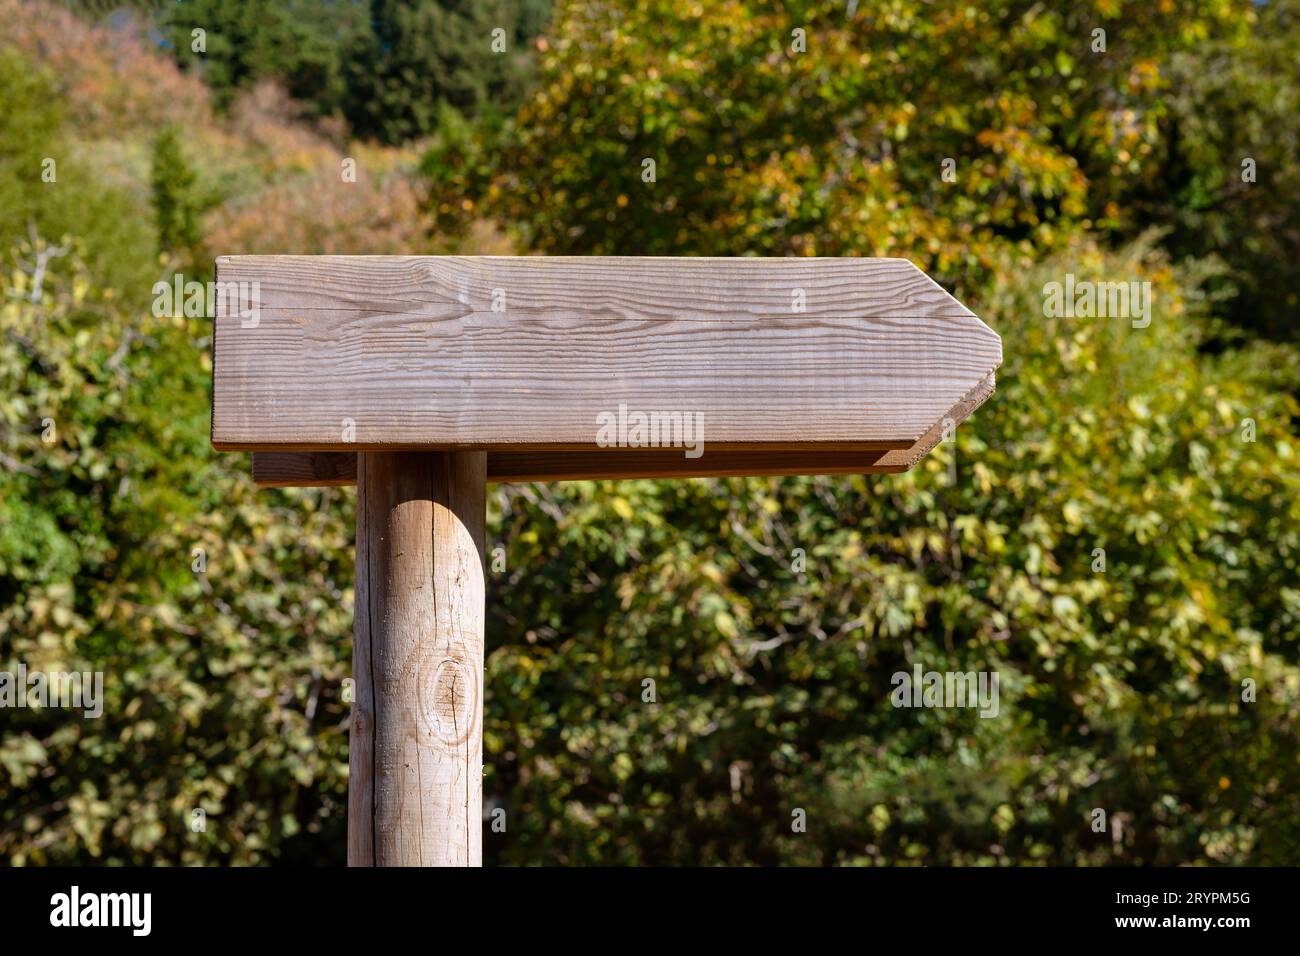 Blank wooden direction sign in the forest or a park. wooden blank signpost concept photo. Stock Photo